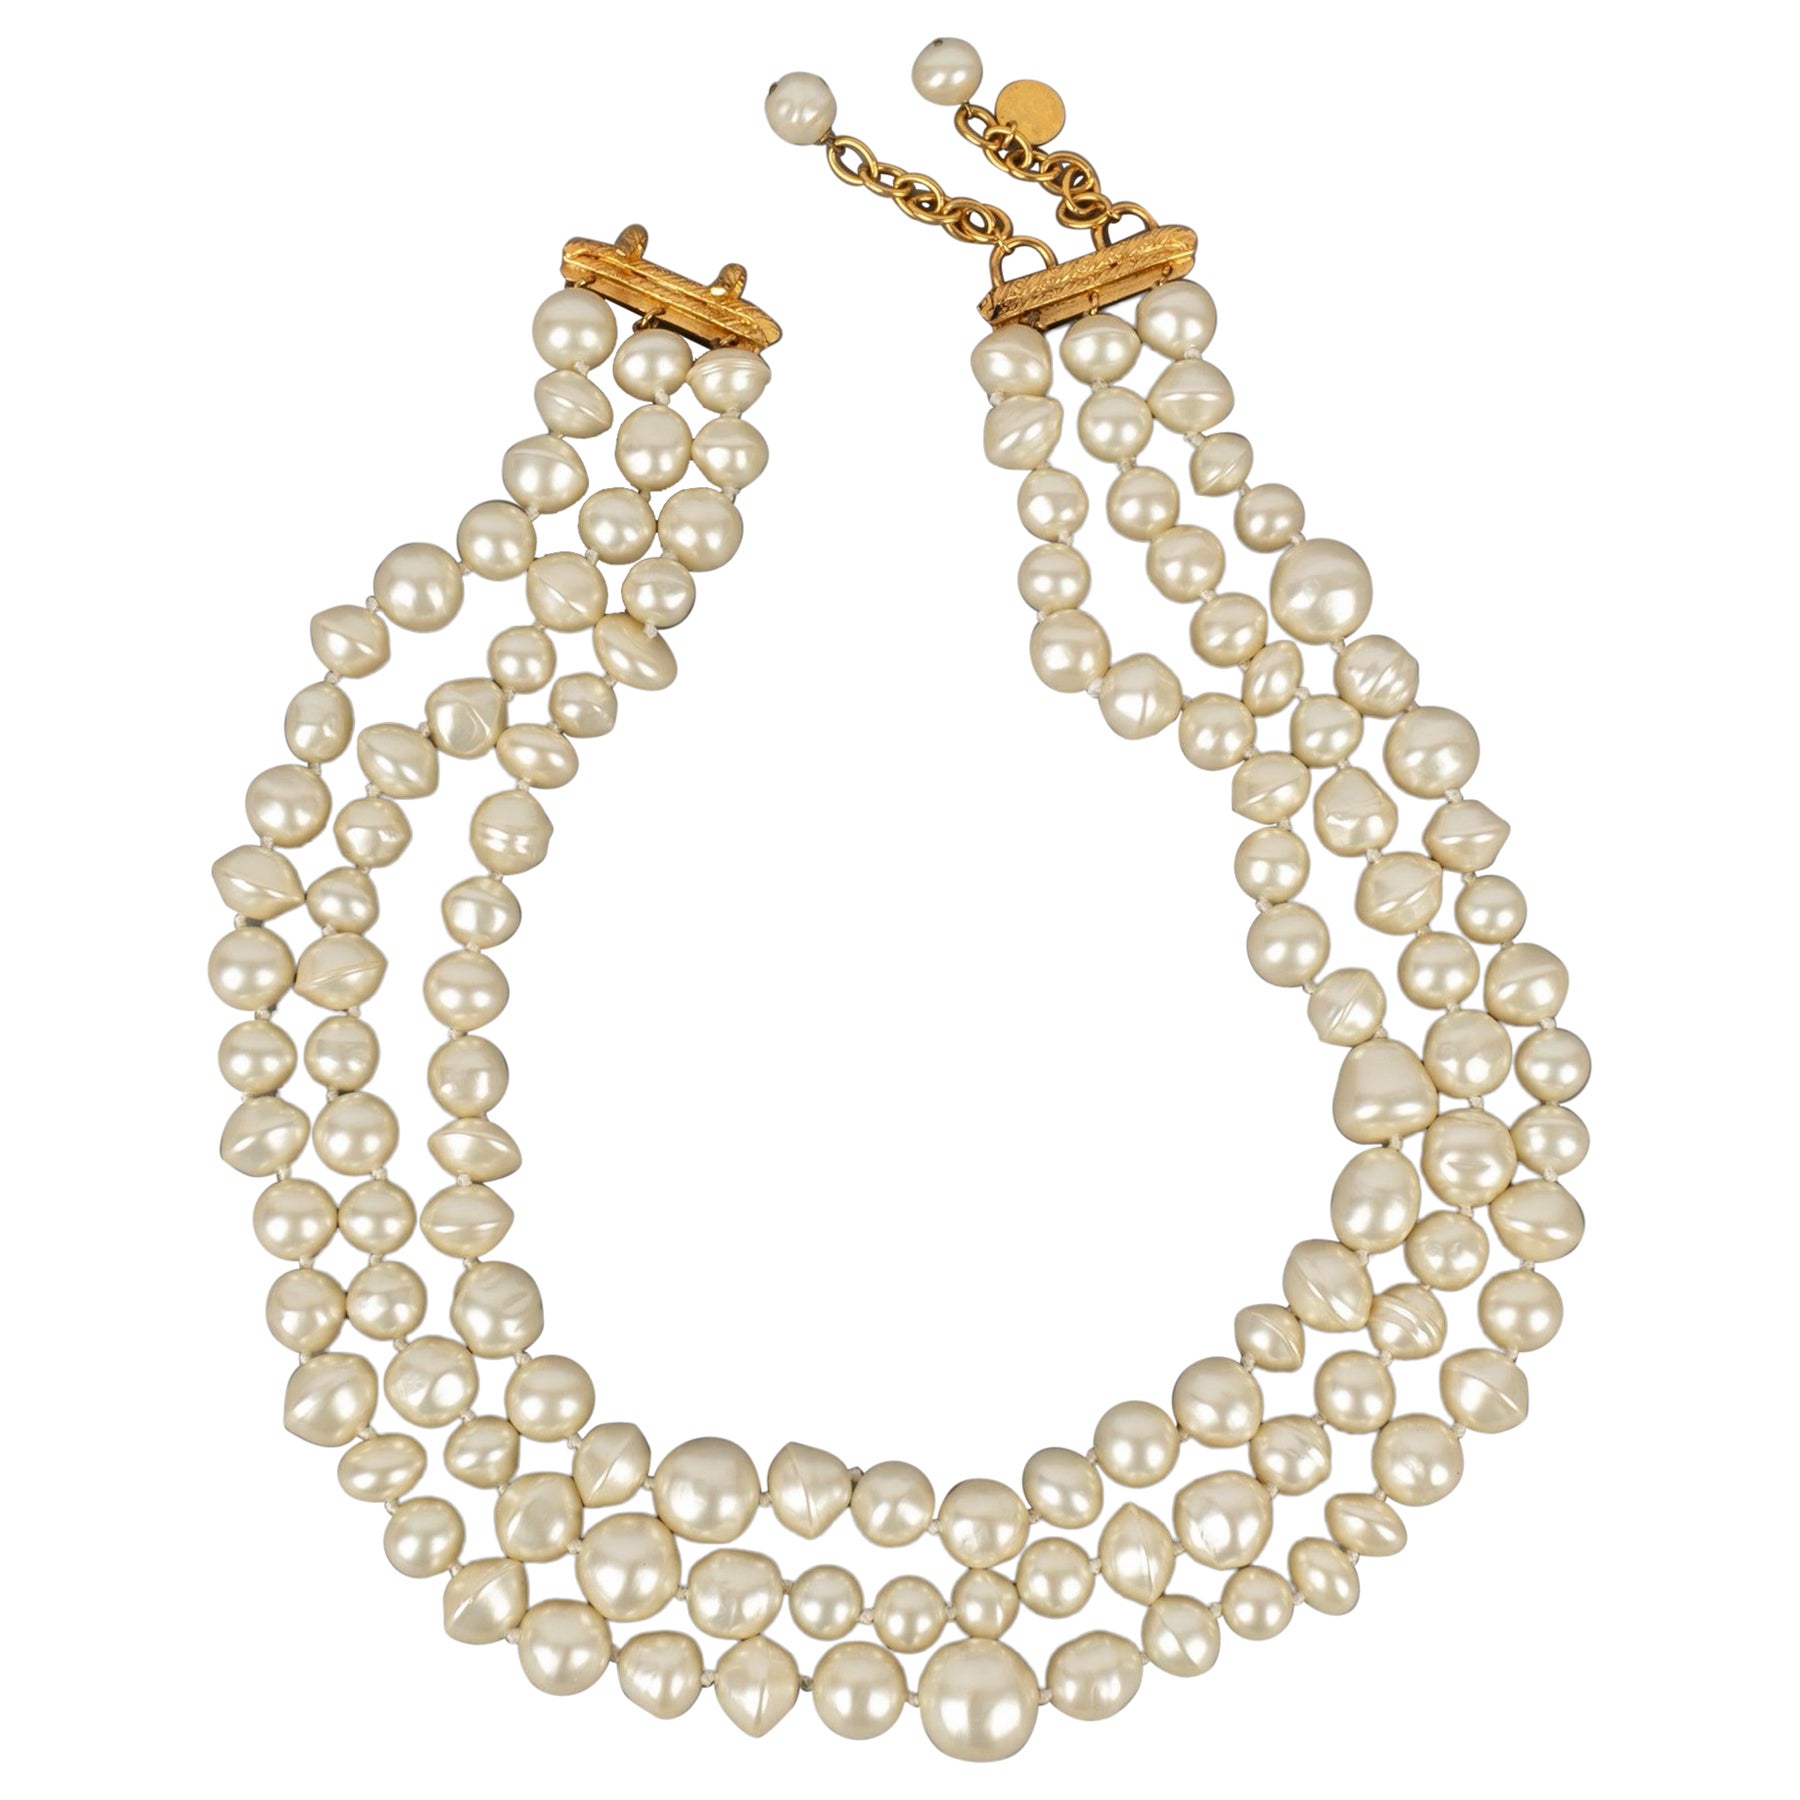 Chanel Three-row Necklace with Costume Pearls